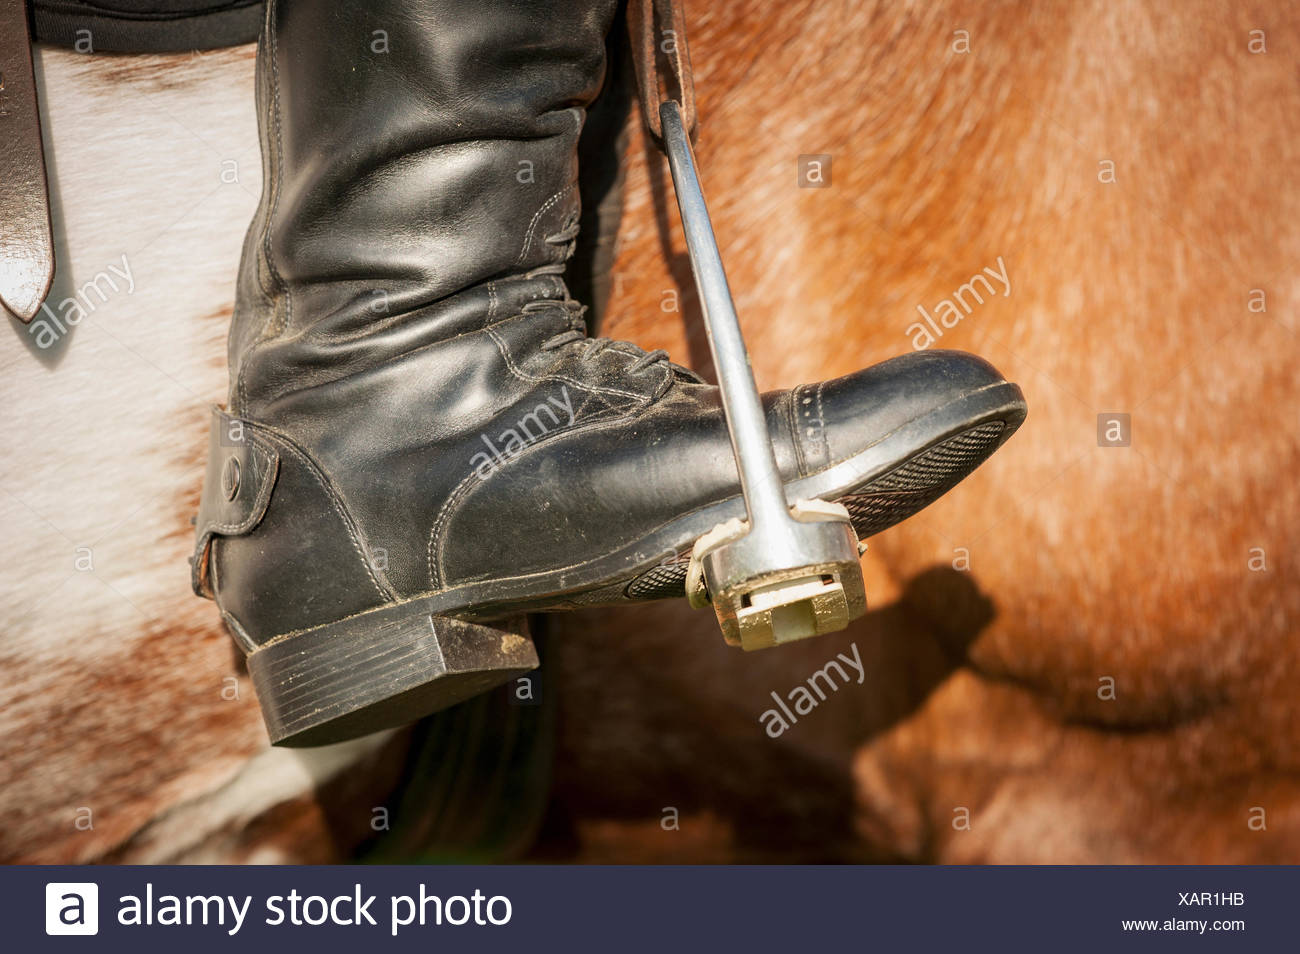 Stirrups Boot High Resolution Stock Photography and Images - Alamy